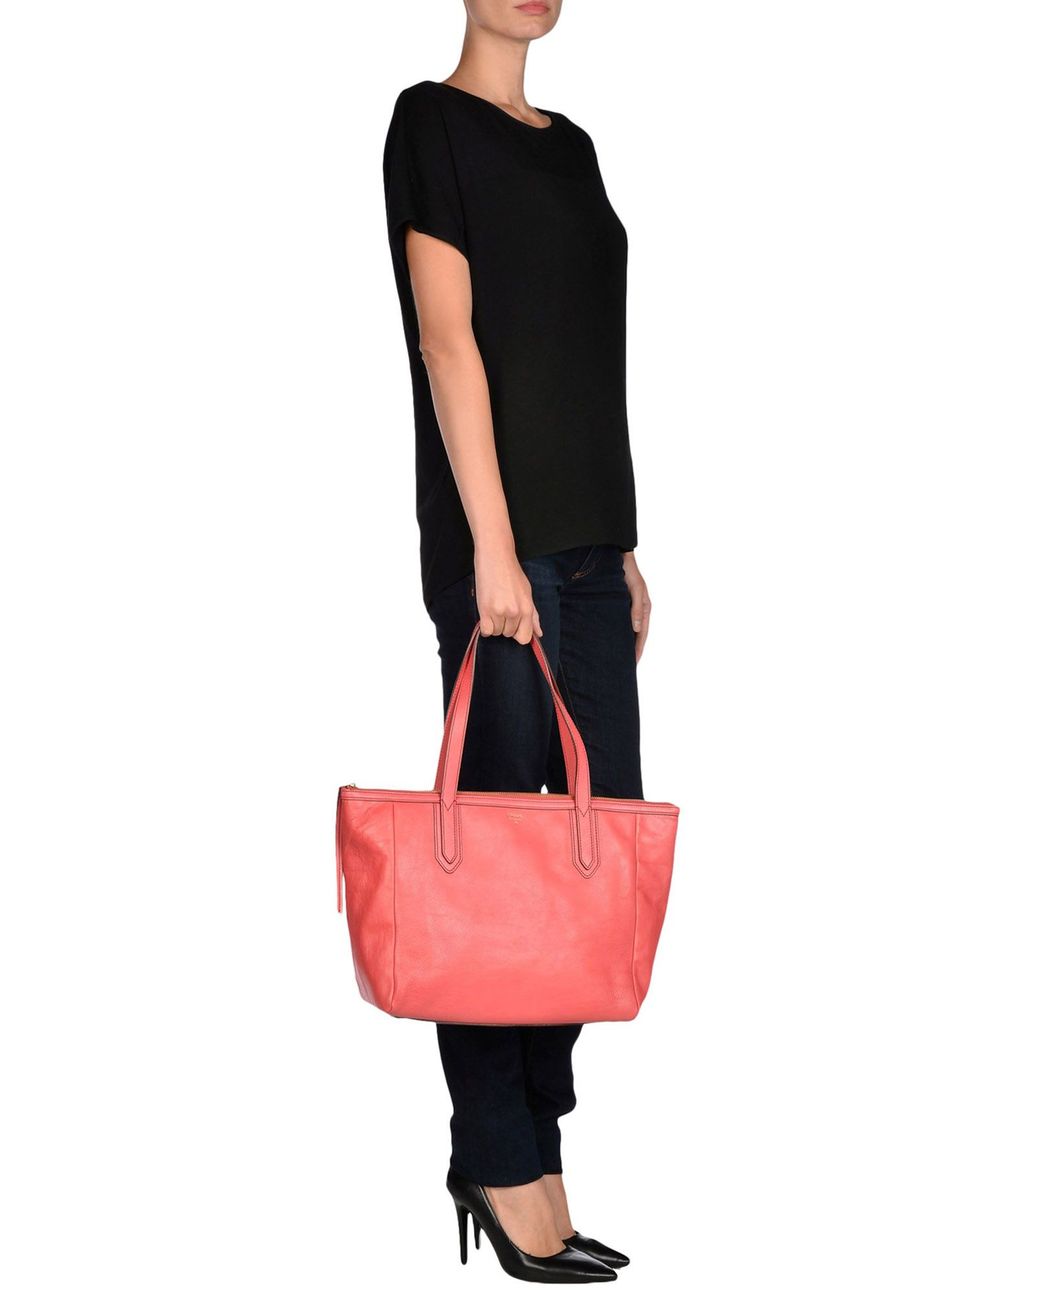 Cognac Cypress Tote | Leather Tote bag made in the USA by KMM & Co.